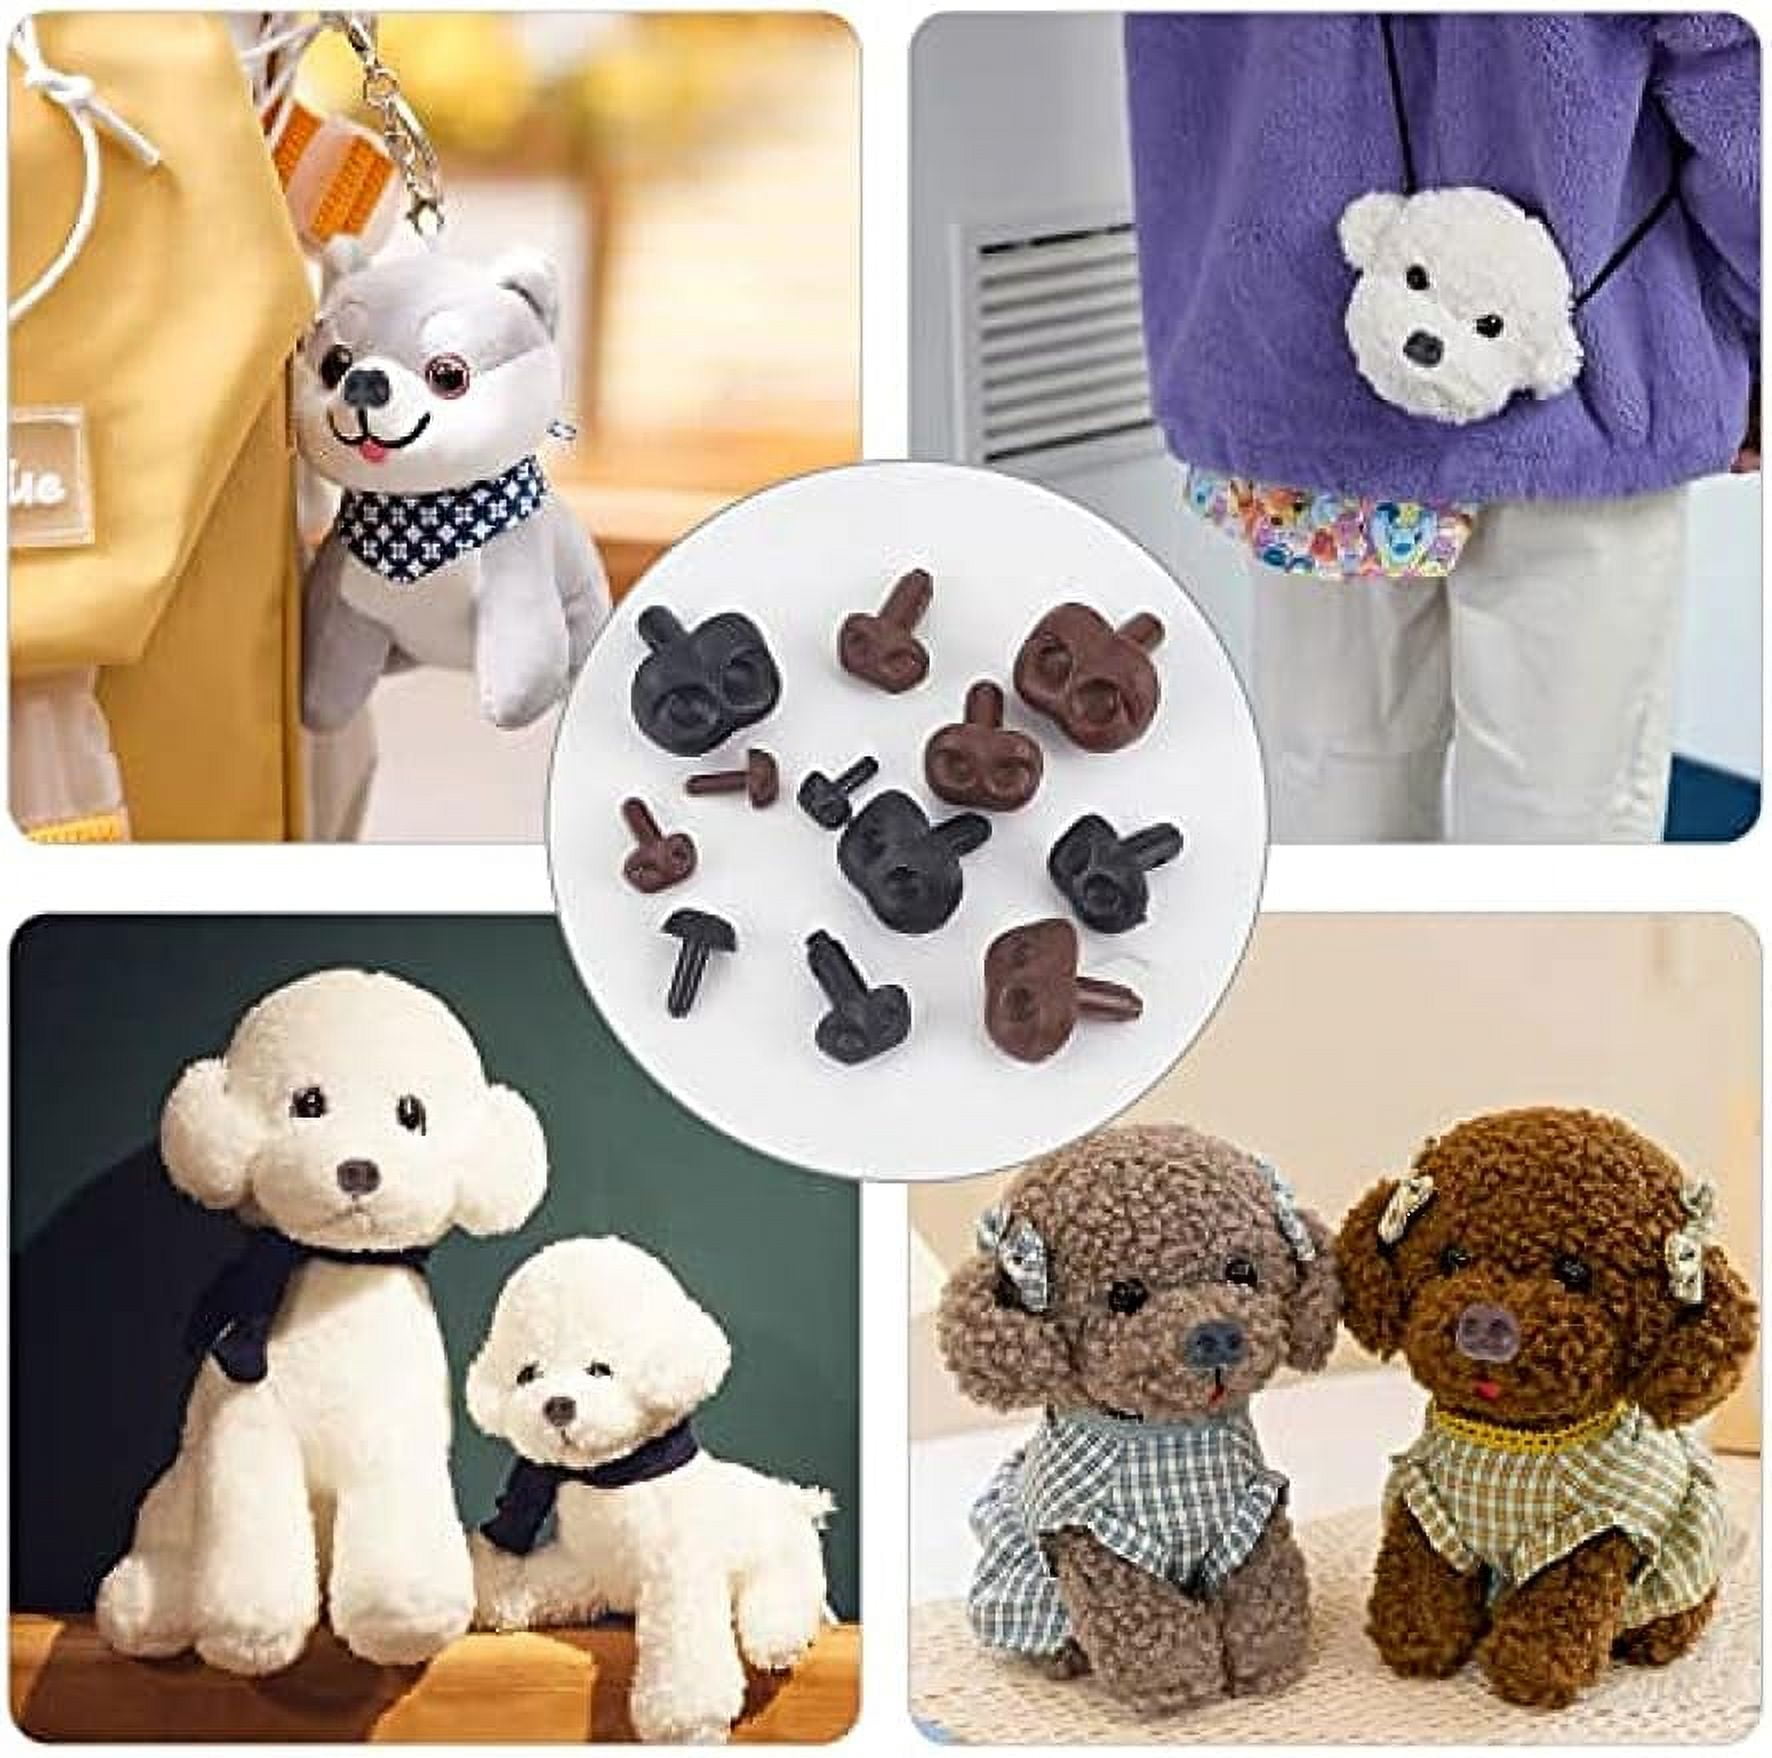 ful Plastic Safety Eyes For DIY Teddy Bears, Plush Toys, And Amigurumi  Crafts Animal Doll Hair Accessories Set From Cong06, $12.03